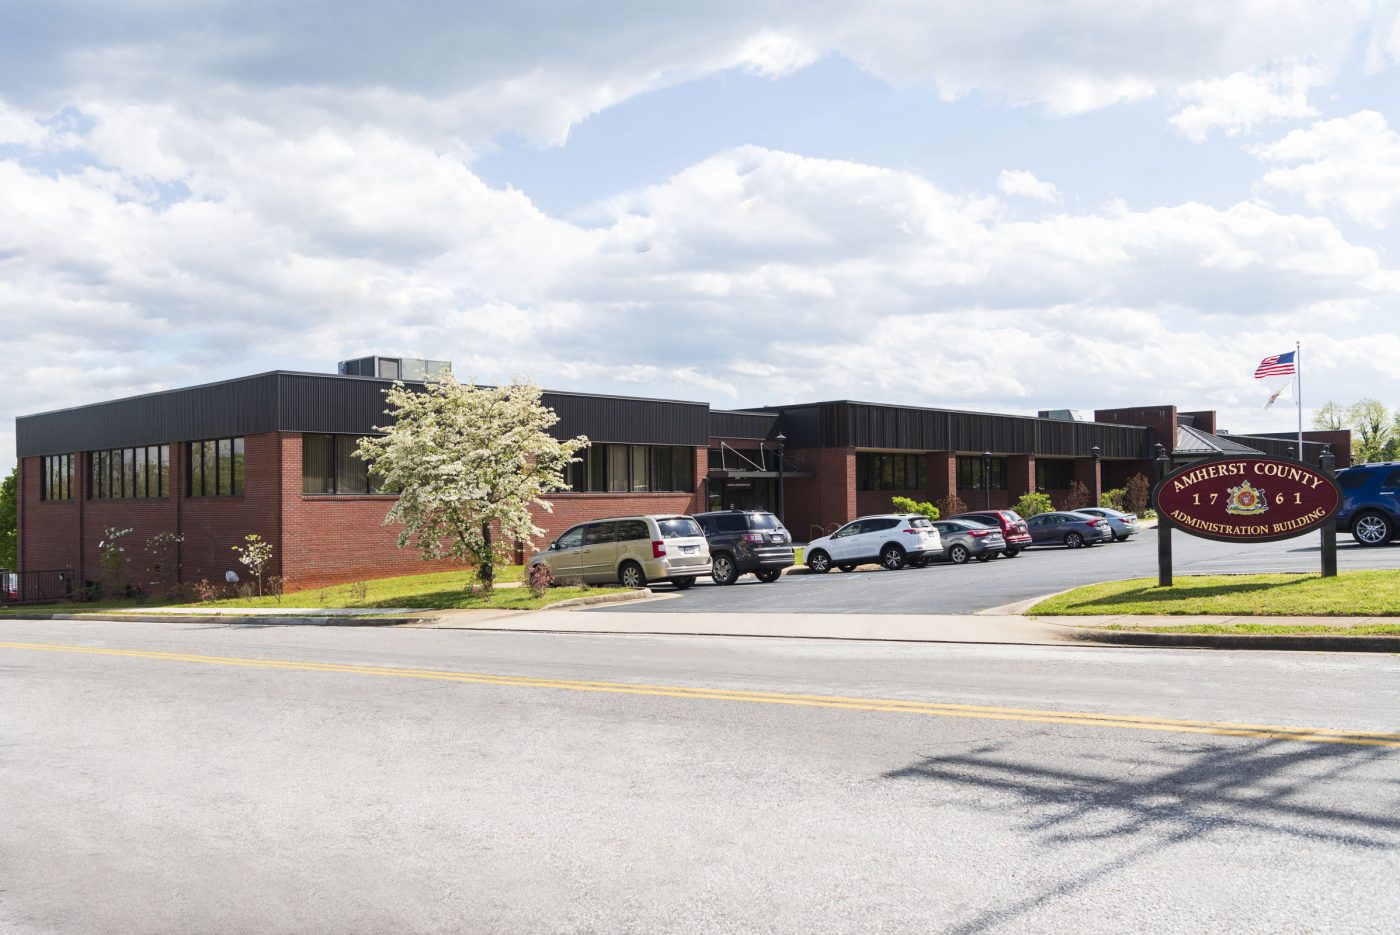 Amherst County Administration Building Architectural Partners